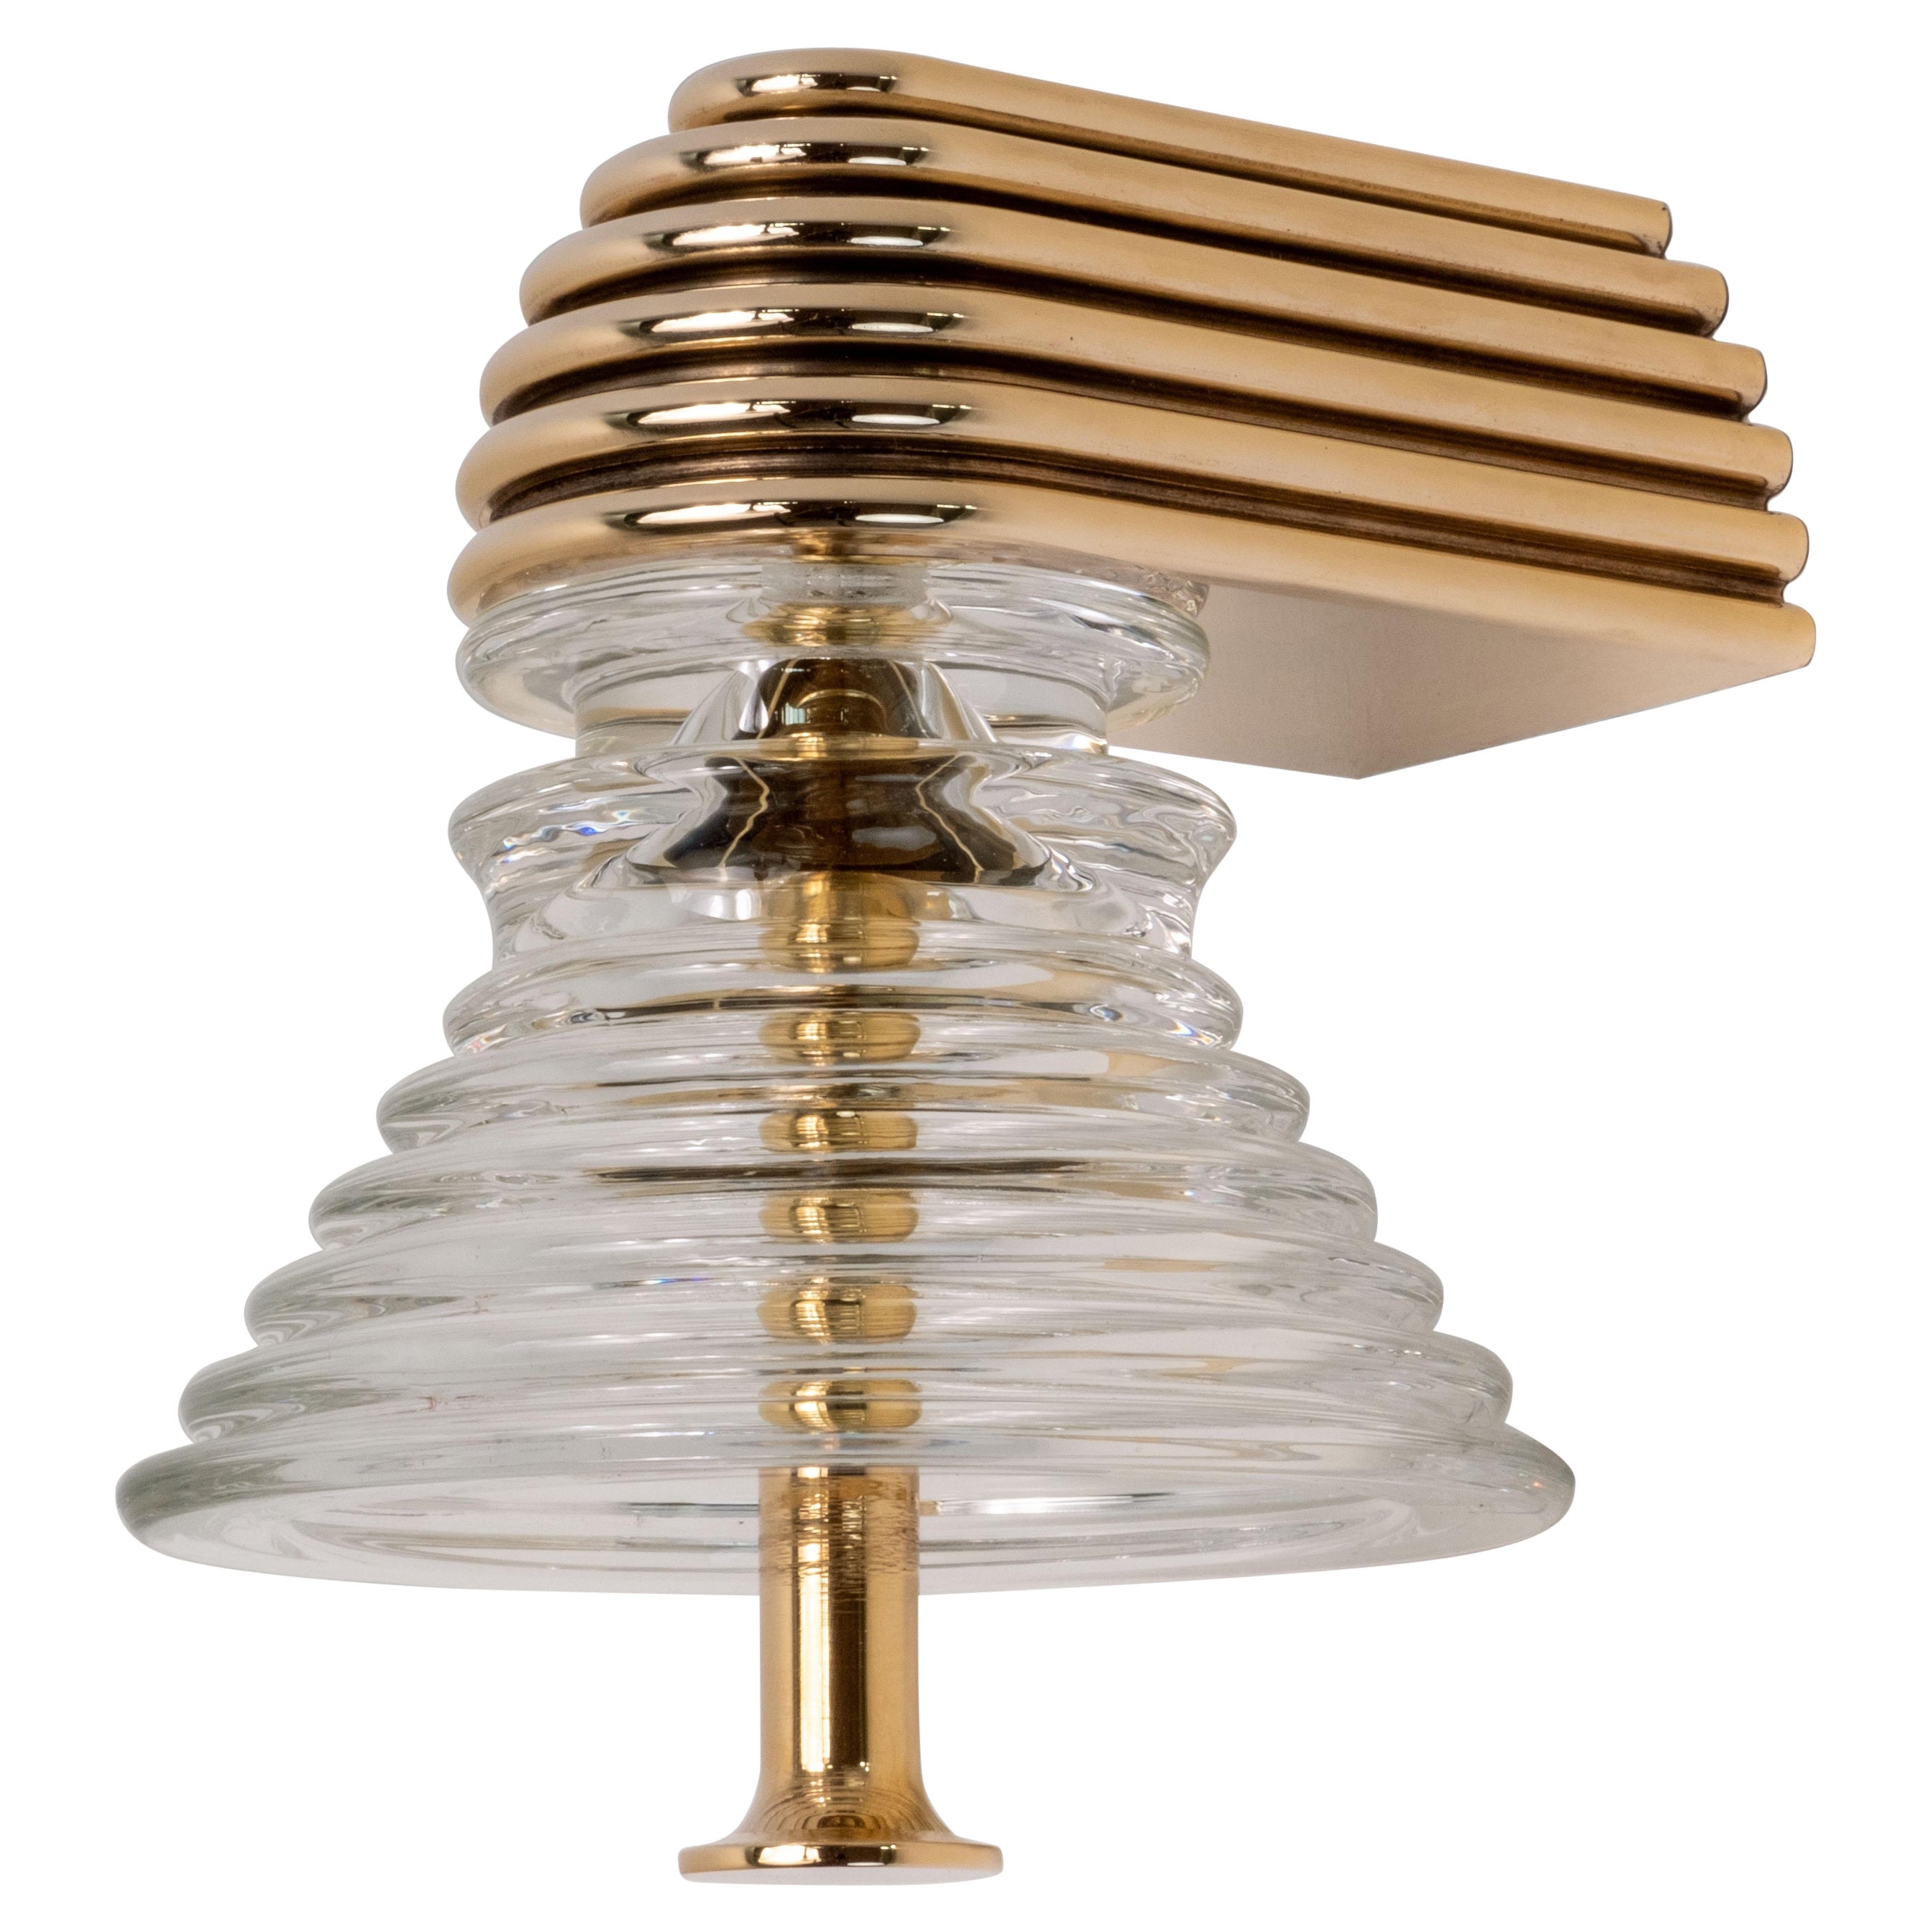 The Insulator 'A' Sconce in polished brass and clear glass by NOVOCASTRIAN deco For Sale